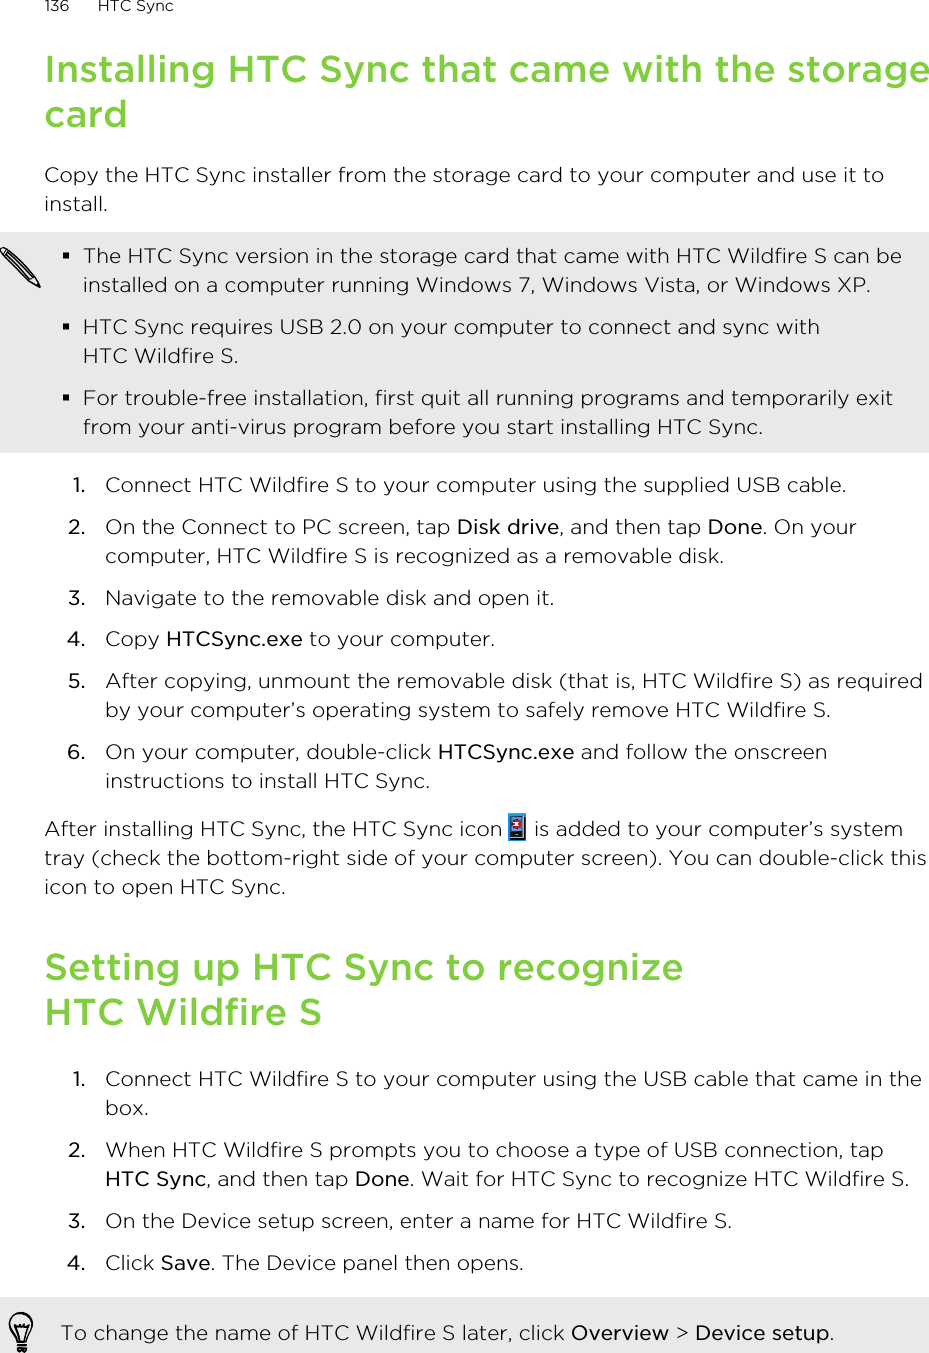 Installing HTC Sync that came with the storagecardCopy the HTC Sync installer from the storage card to your computer and use it toinstall.§The HTC Sync version in the storage card that came with HTC Wildfire S can beinstalled on a computer running Windows 7, Windows Vista, or Windows XP.§HTC Sync requires USB 2.0 on your computer to connect and sync withHTC Wildfire S.§For trouble-free installation, first quit all running programs and temporarily exitfrom your anti-virus program before you start installing HTC Sync.1. Connect HTC Wildfire S to your computer using the supplied USB cable.2. On the Connect to PC screen, tap Disk drive, and then tap Done. On yourcomputer, HTC Wildfire S is recognized as a removable disk.3. Navigate to the removable disk and open it.4. Copy HTCSync.exe to your computer.5. After copying, unmount the removable disk (that is, HTC Wildfire S) as requiredby your computer’s operating system to safely remove HTC Wildfire S.6. On your computer, double-click HTCSync.exe and follow the onscreeninstructions to install HTC Sync.After installing HTC Sync, the HTC Sync icon   is added to your computer’s systemtray (check the bottom-right side of your computer screen). You can double-click thisicon to open HTC Sync.Setting up HTC Sync to recognizeHTC Wildfire S1. Connect HTC Wildfire S to your computer using the USB cable that came in thebox.2. When HTC Wildfire S prompts you to choose a type of USB connection, tapHTC Sync, and then tap Done. Wait for HTC Sync to recognize HTC Wildfire S.3. On the Device setup screen, enter a name for HTC Wildfire S.4. Click Save. The Device panel then opens.To change the name of HTC Wildfire S later, click Overview &gt; Device setup.136 HTC Sync